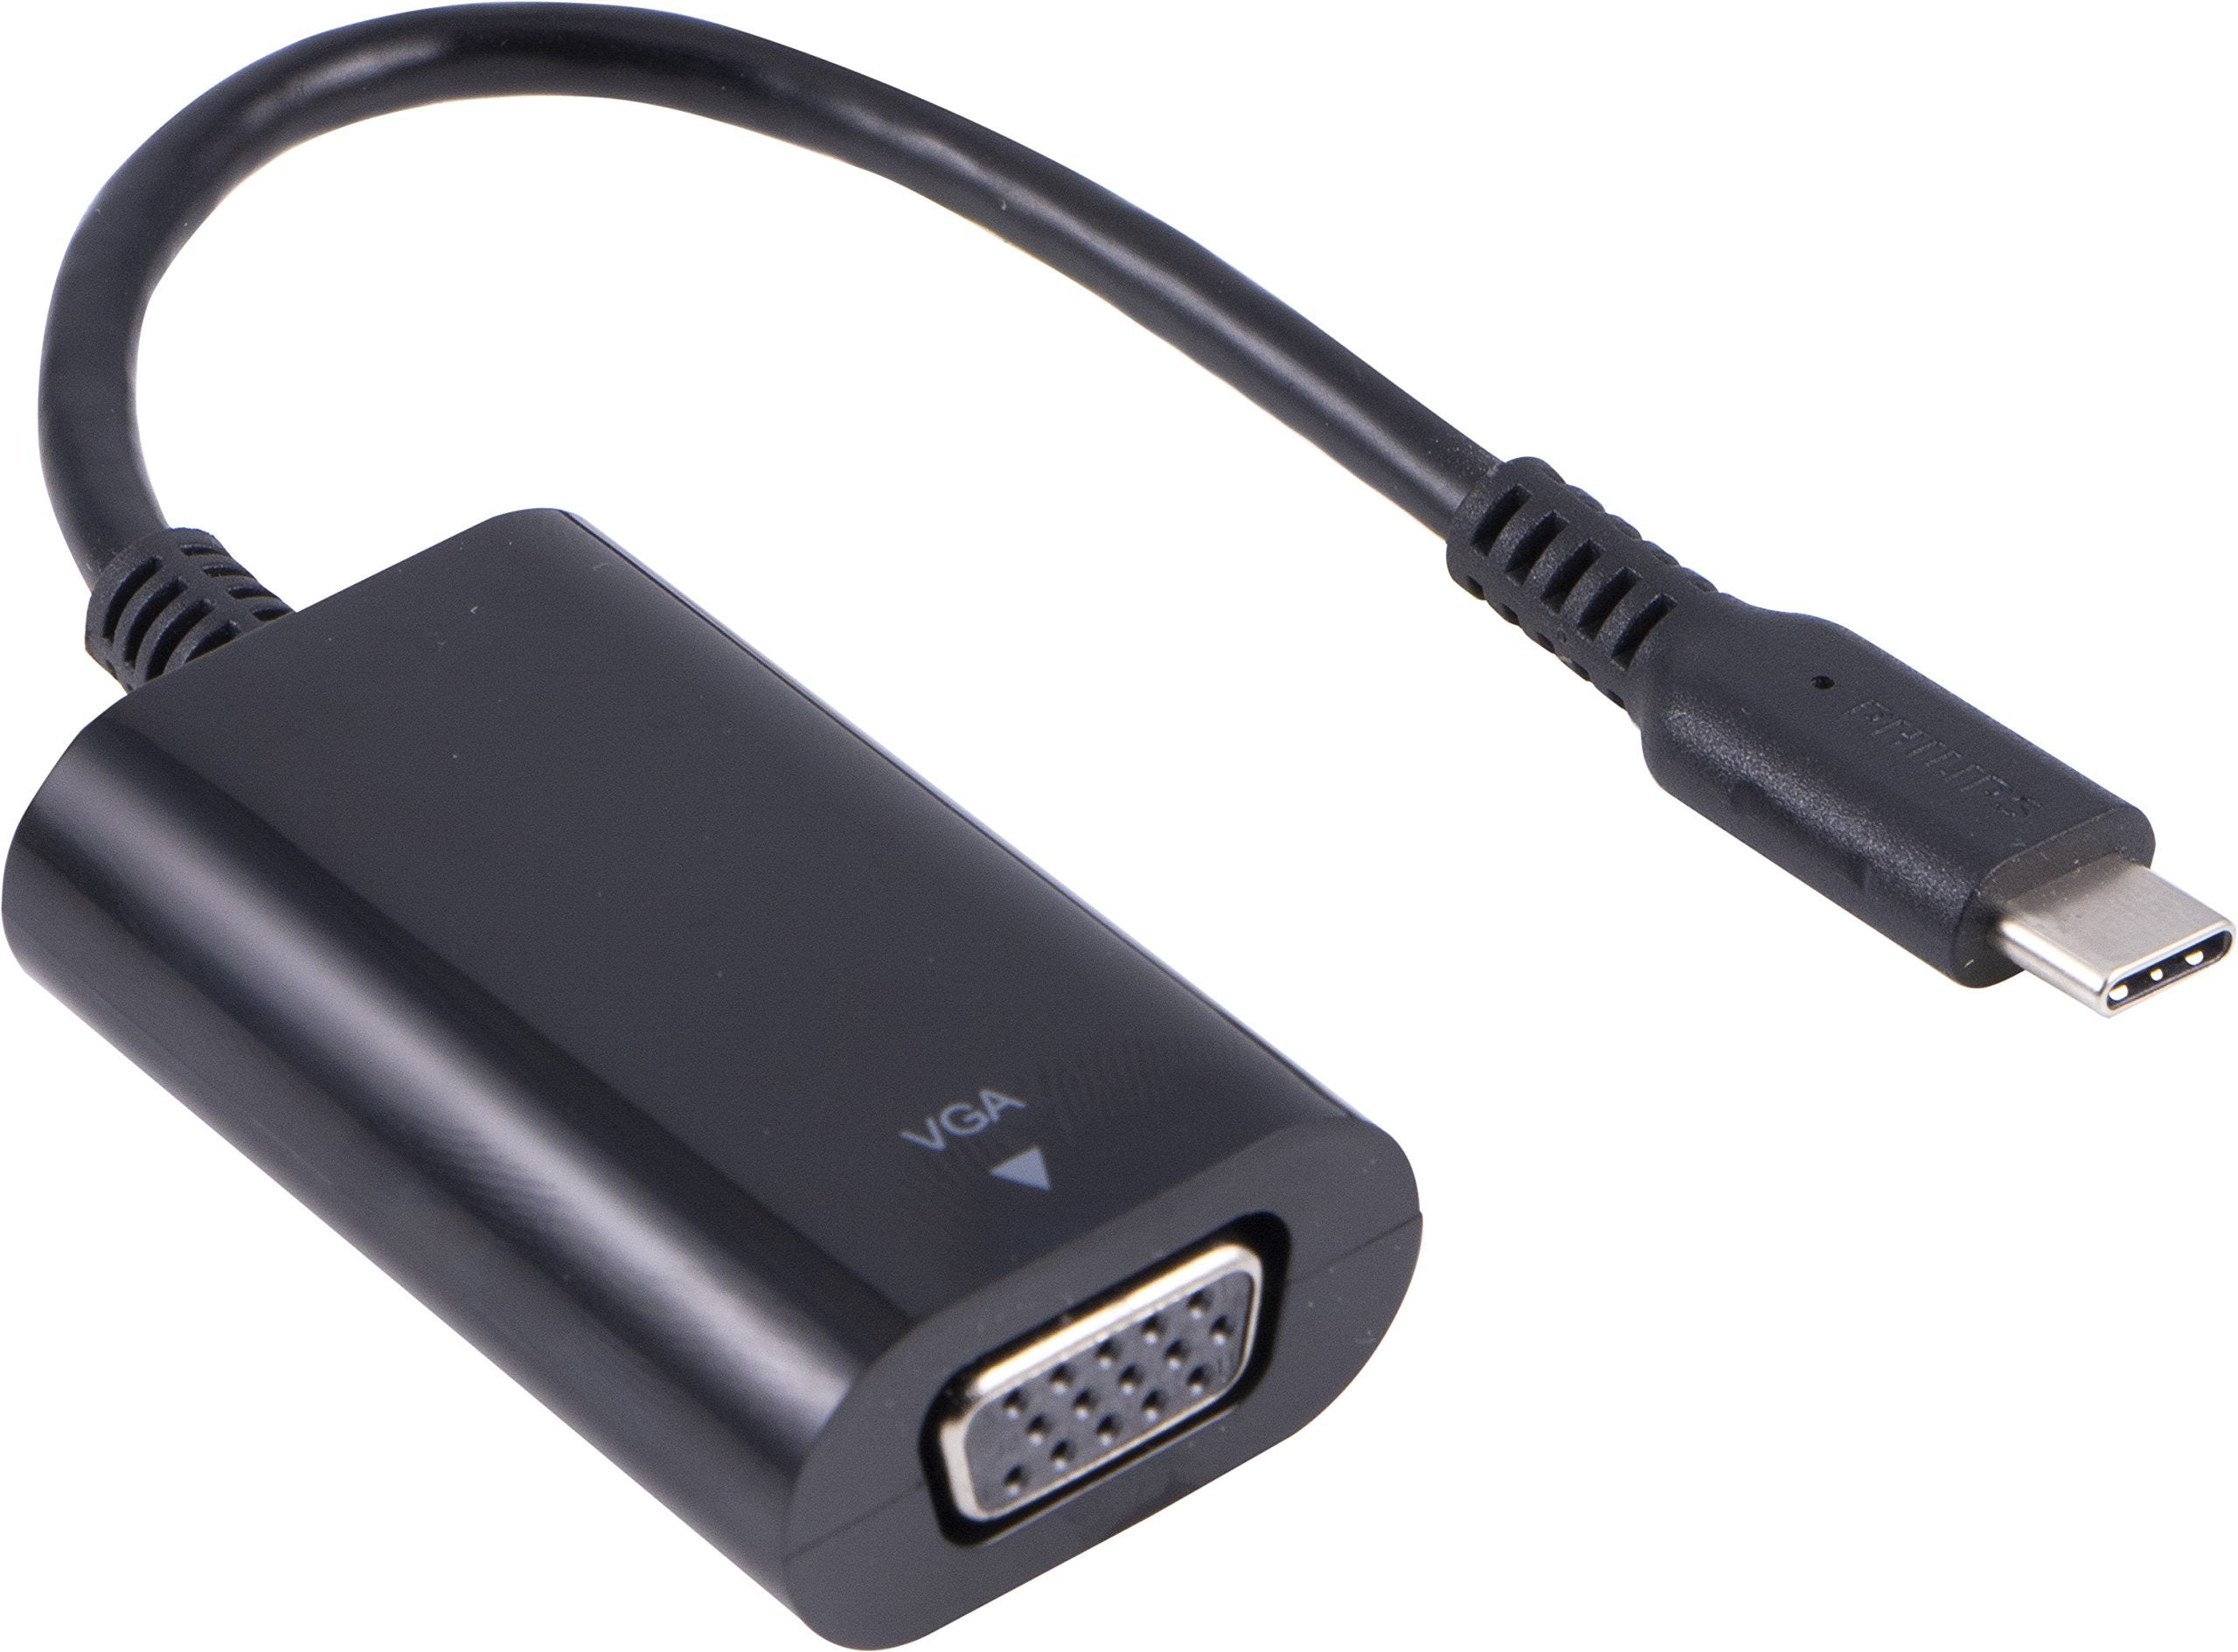 Philips USB C to VGA Adapter, Type C Connector, Full HD Compatible, Compact Design, Portable Adapter, Works with Projectors, Windows 7 and up, Mac, Black, SWV2751N/27 - Product Is Brand New